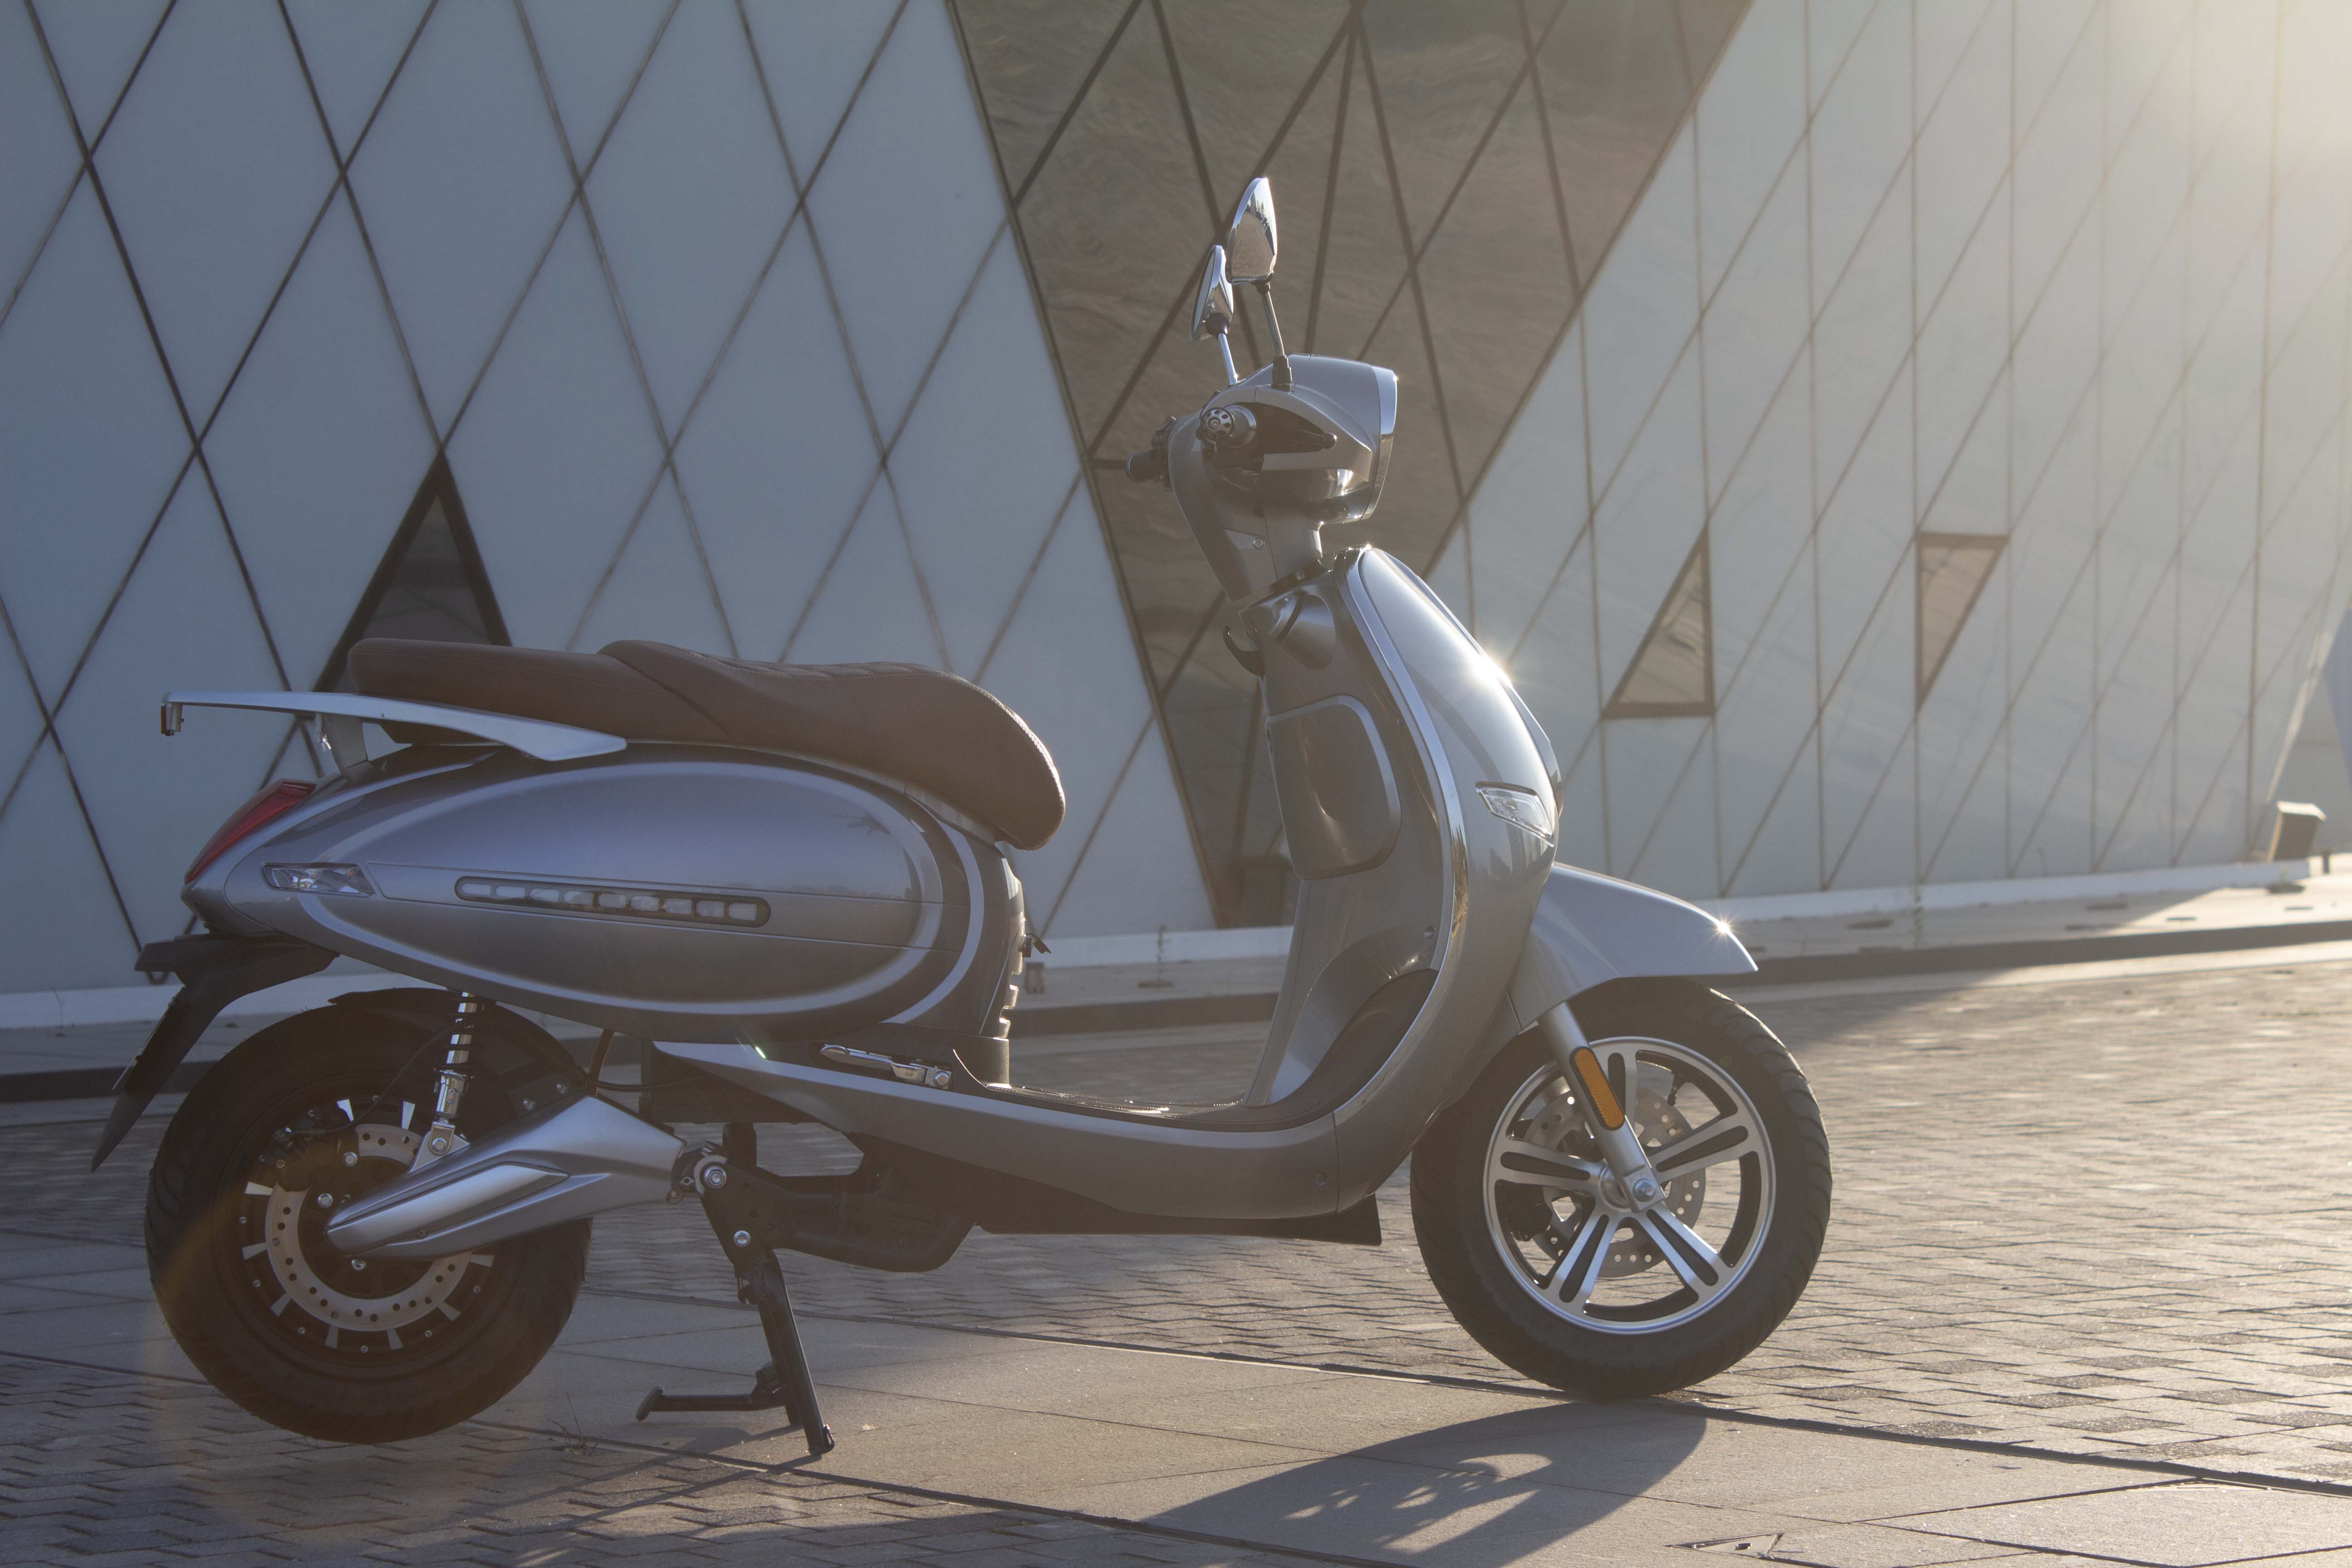 Why Do You Need An Electric Motorcycle?